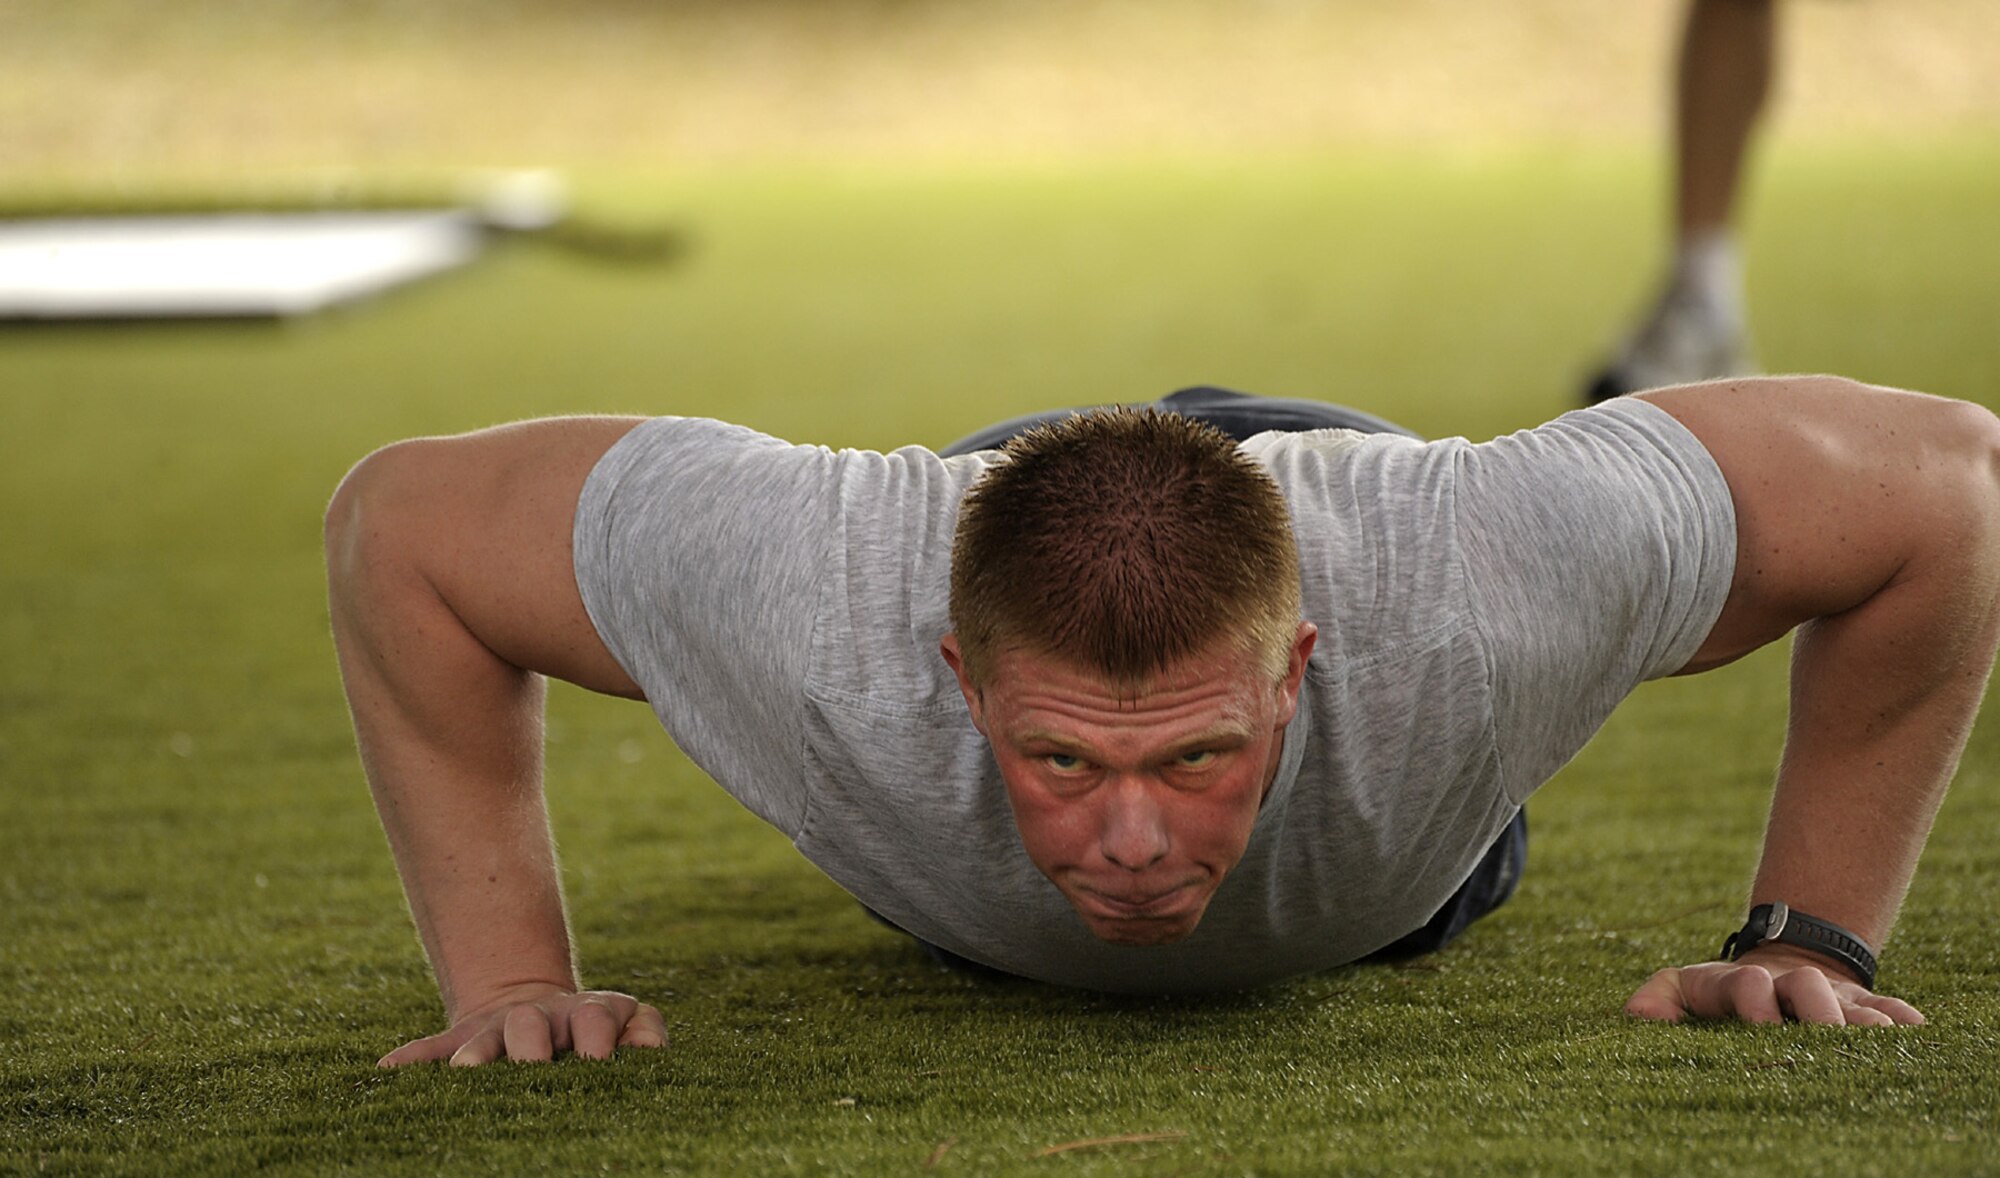 Senior Airman Matthew Sattler, 4th Aircraft Maintenance Unit, performs push-ups during the Physical Ability Stamina Test held March 12 at Hurlburt Field, Fla.  Hosted by the Air Force Special Operations Training Center, candidates had to pass every element of the PAST to qualify for combat control, pararescue, special operations weather or the combat rescue officer career fields.  (U.S. Air Force photo by Master Sgt. Russell E. Cooley IV) (Released)